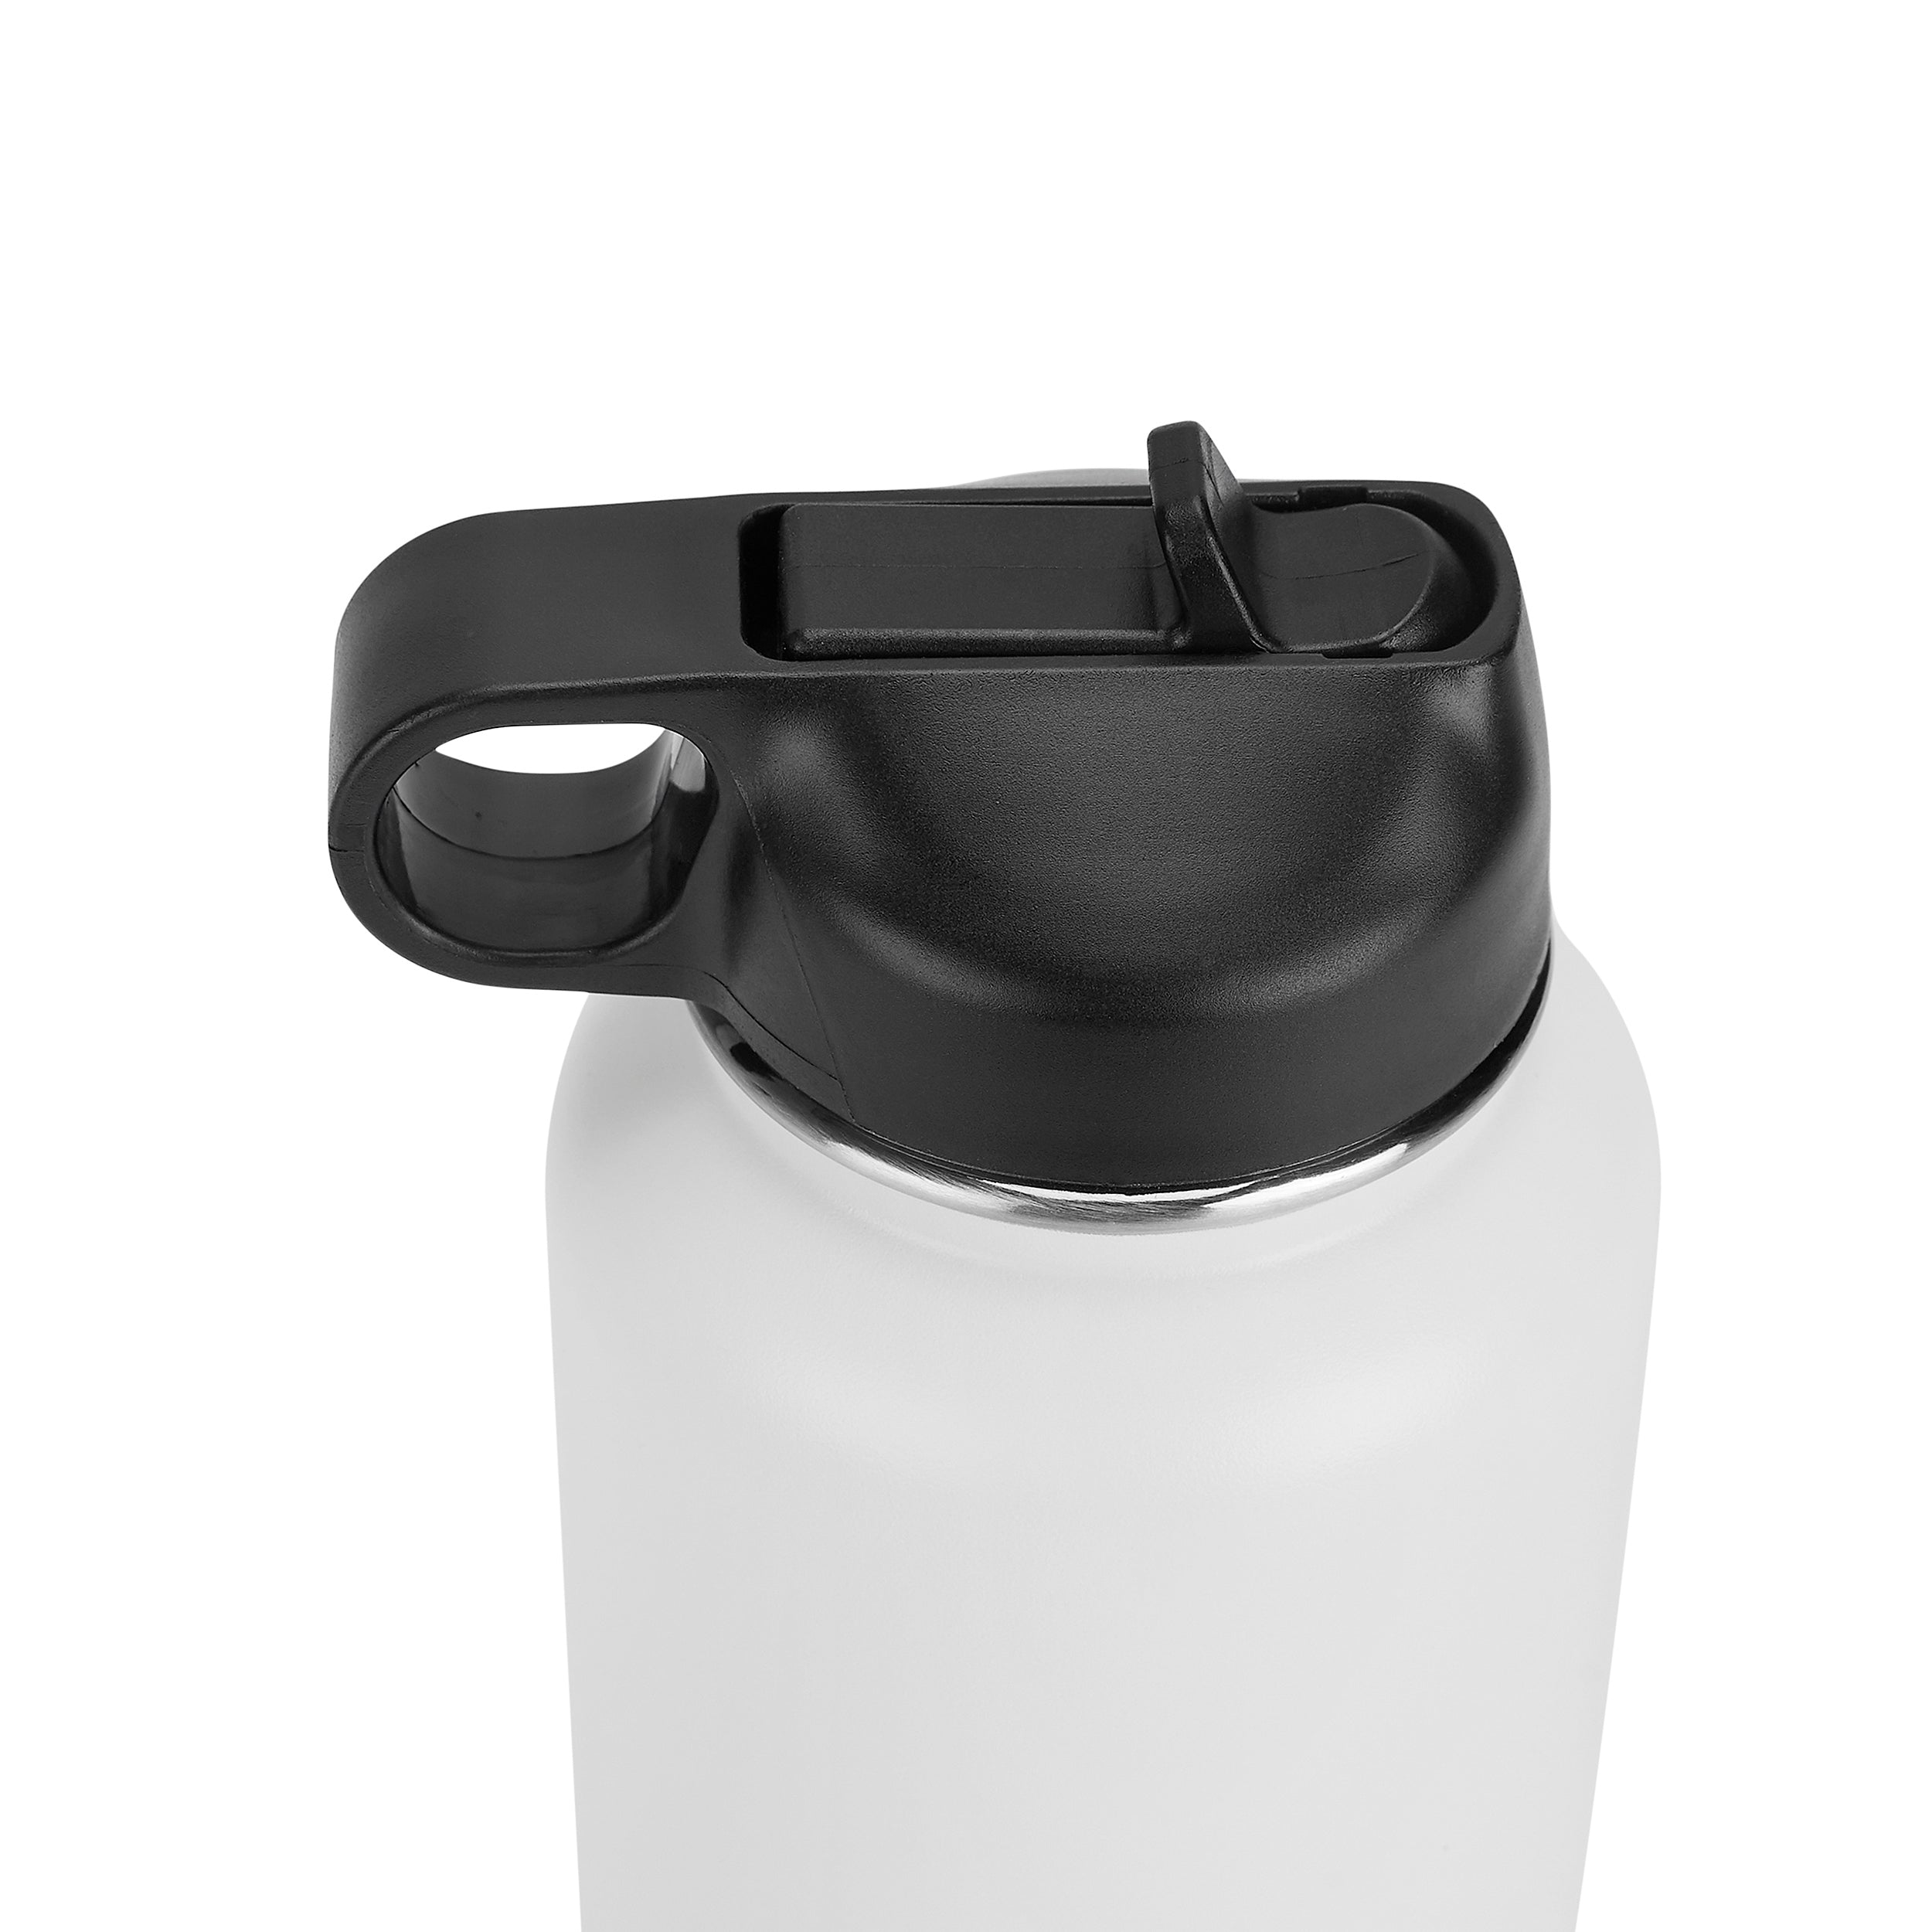 32oz Cycling-themed Hydro Water Bottle